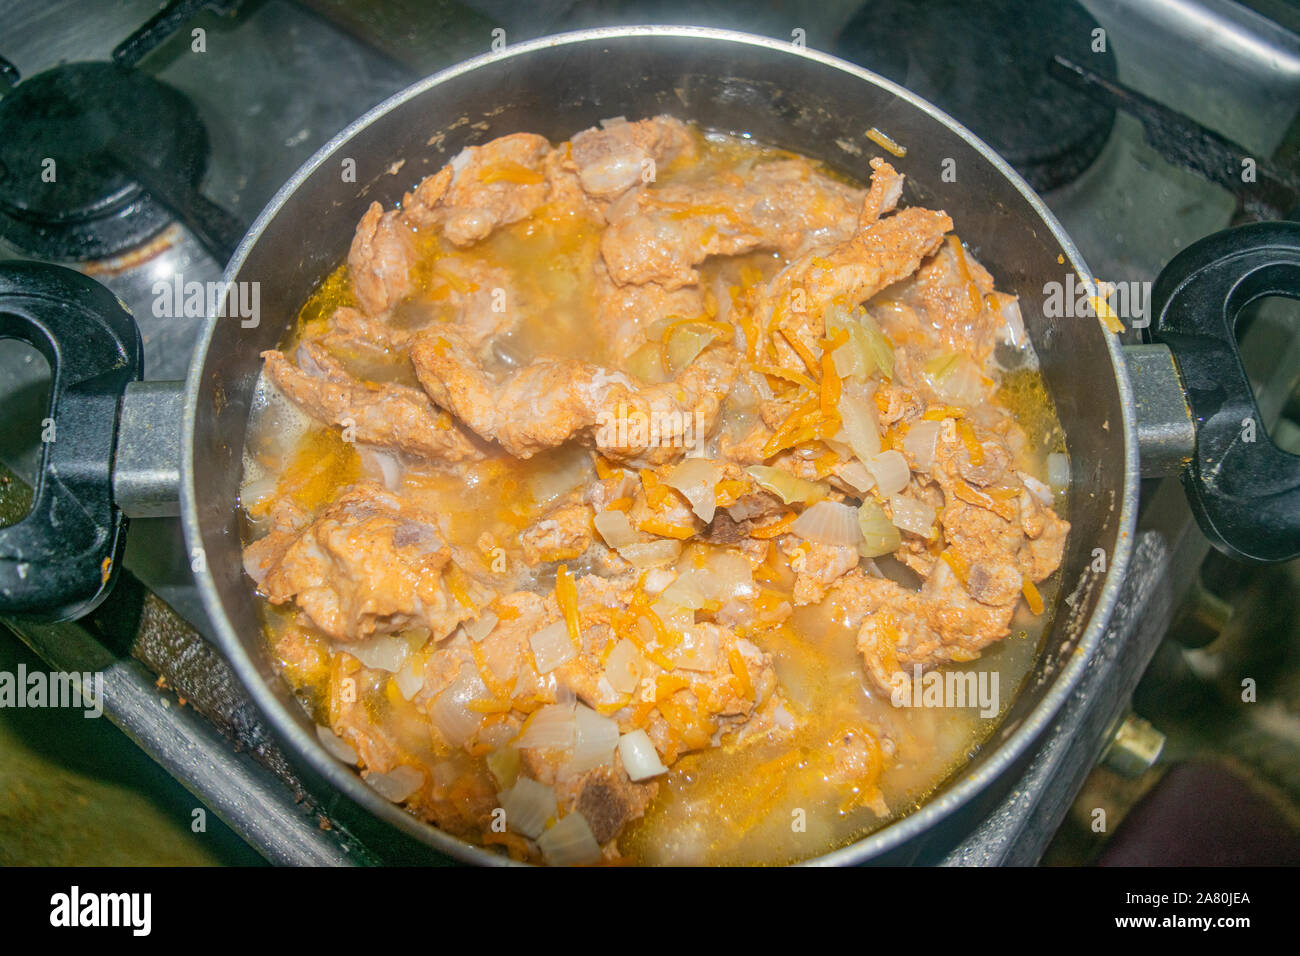 Meat with onions and carrots stewed in a saucepan. Home cooking Stock Photo